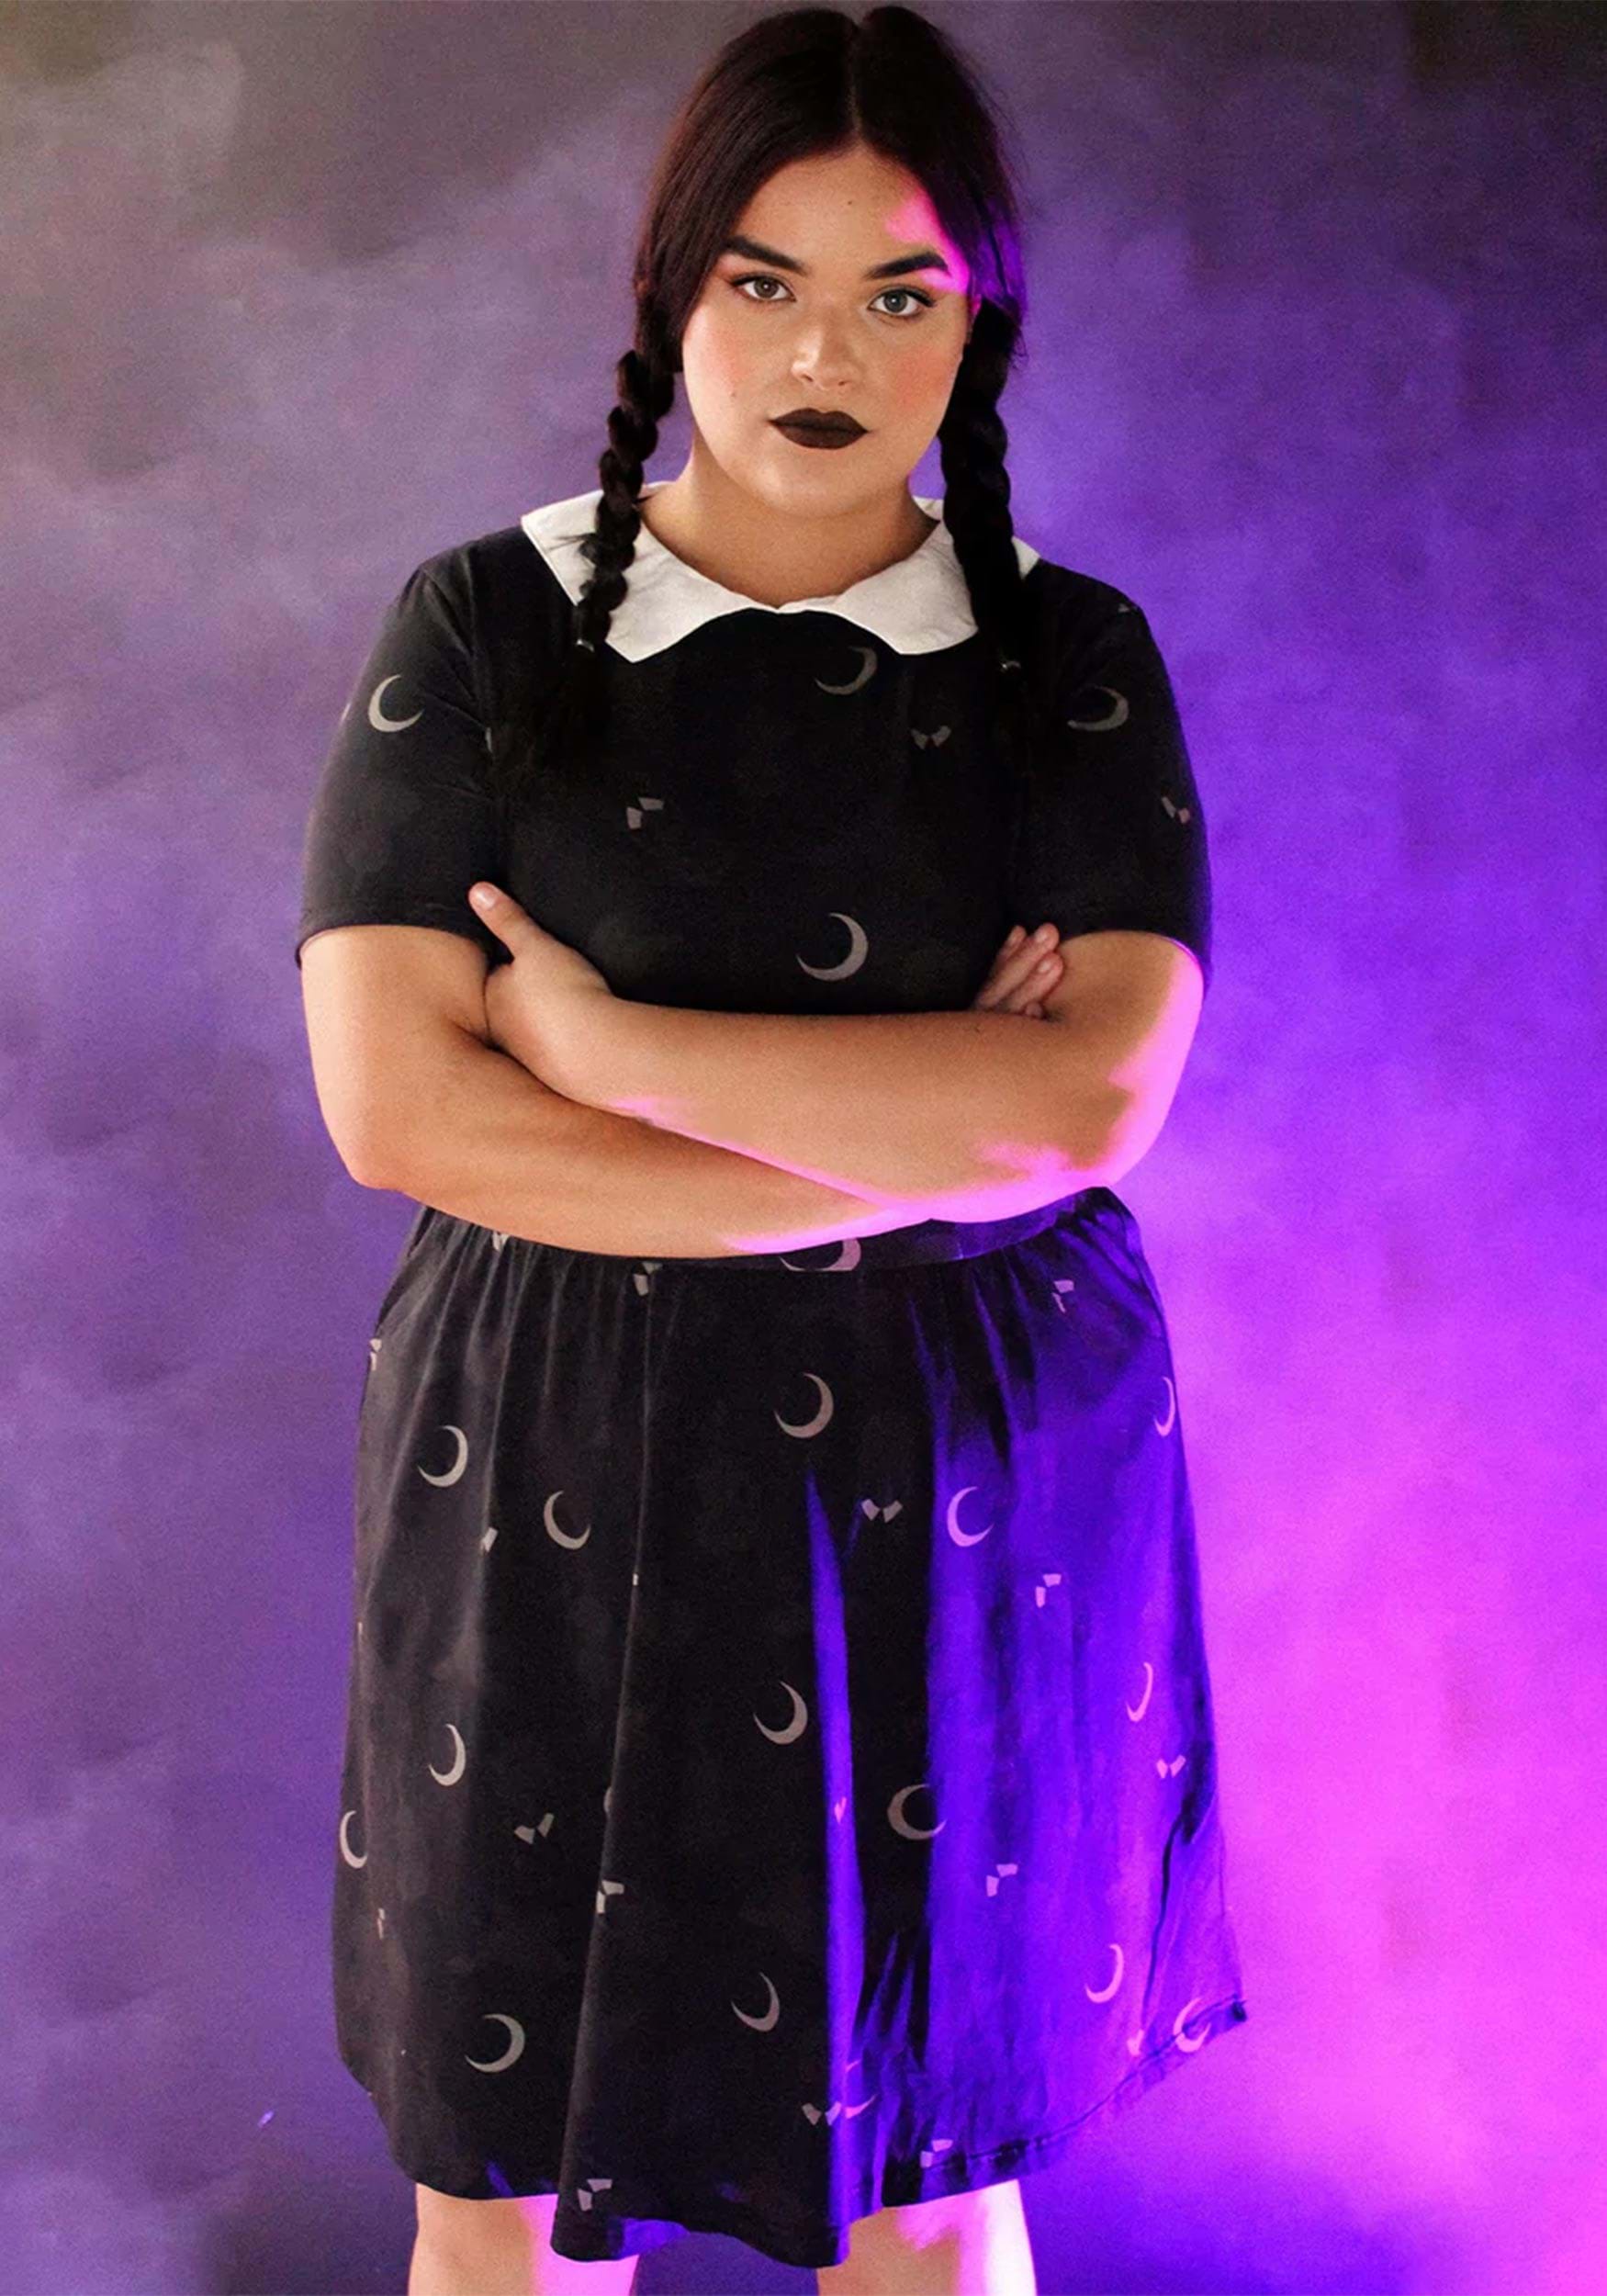 Gothic Girl Wednesday Addams Family Halloween Costume Womens Plus/Standard  Size